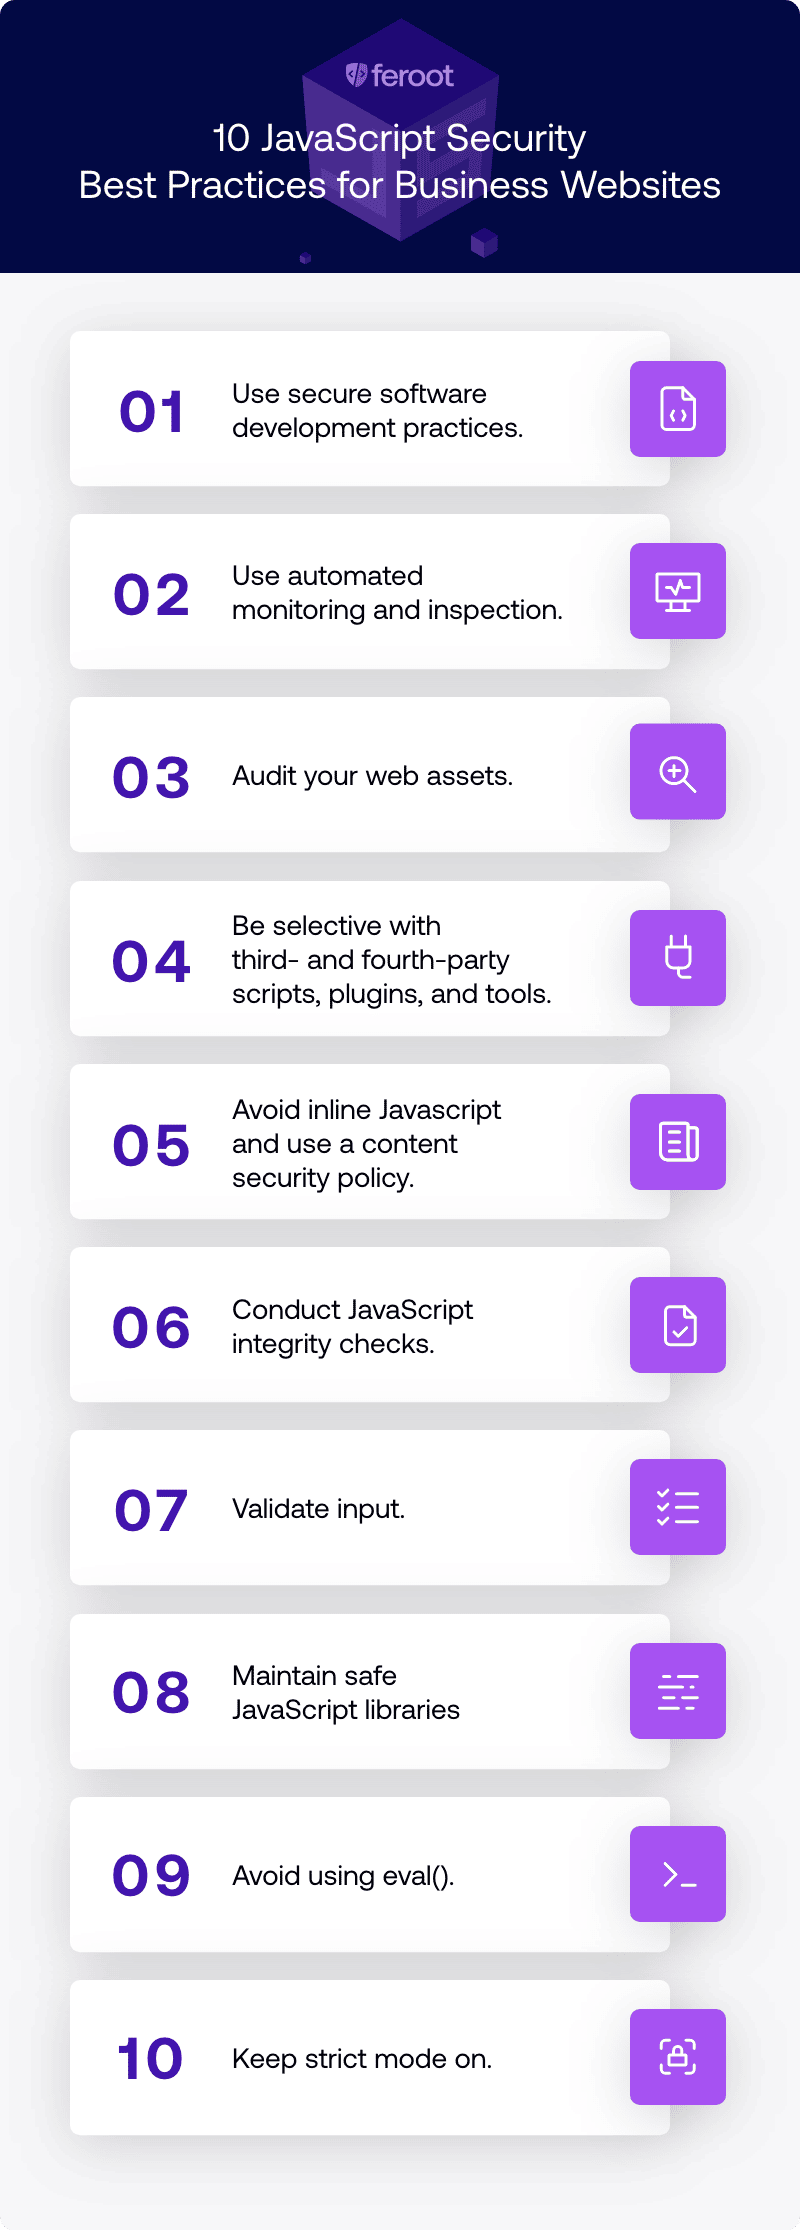 10 JavaScript Security Best Practices for Business Websites. (1) Use secure software development practices; (2) Use automated monitoring and inspection; (3) Audit your web assets; (4) Be selective with third- and fourth-party scripts, plugins, and tools; (5) Avoid inline JavaScript and use a content security policy; (6) Conduct JavaScript integrity checks; (7) Validate input; (8) Maintain safe JavaScript libraries; (9) Avoid using eval(); (10) Keep strict mode on.